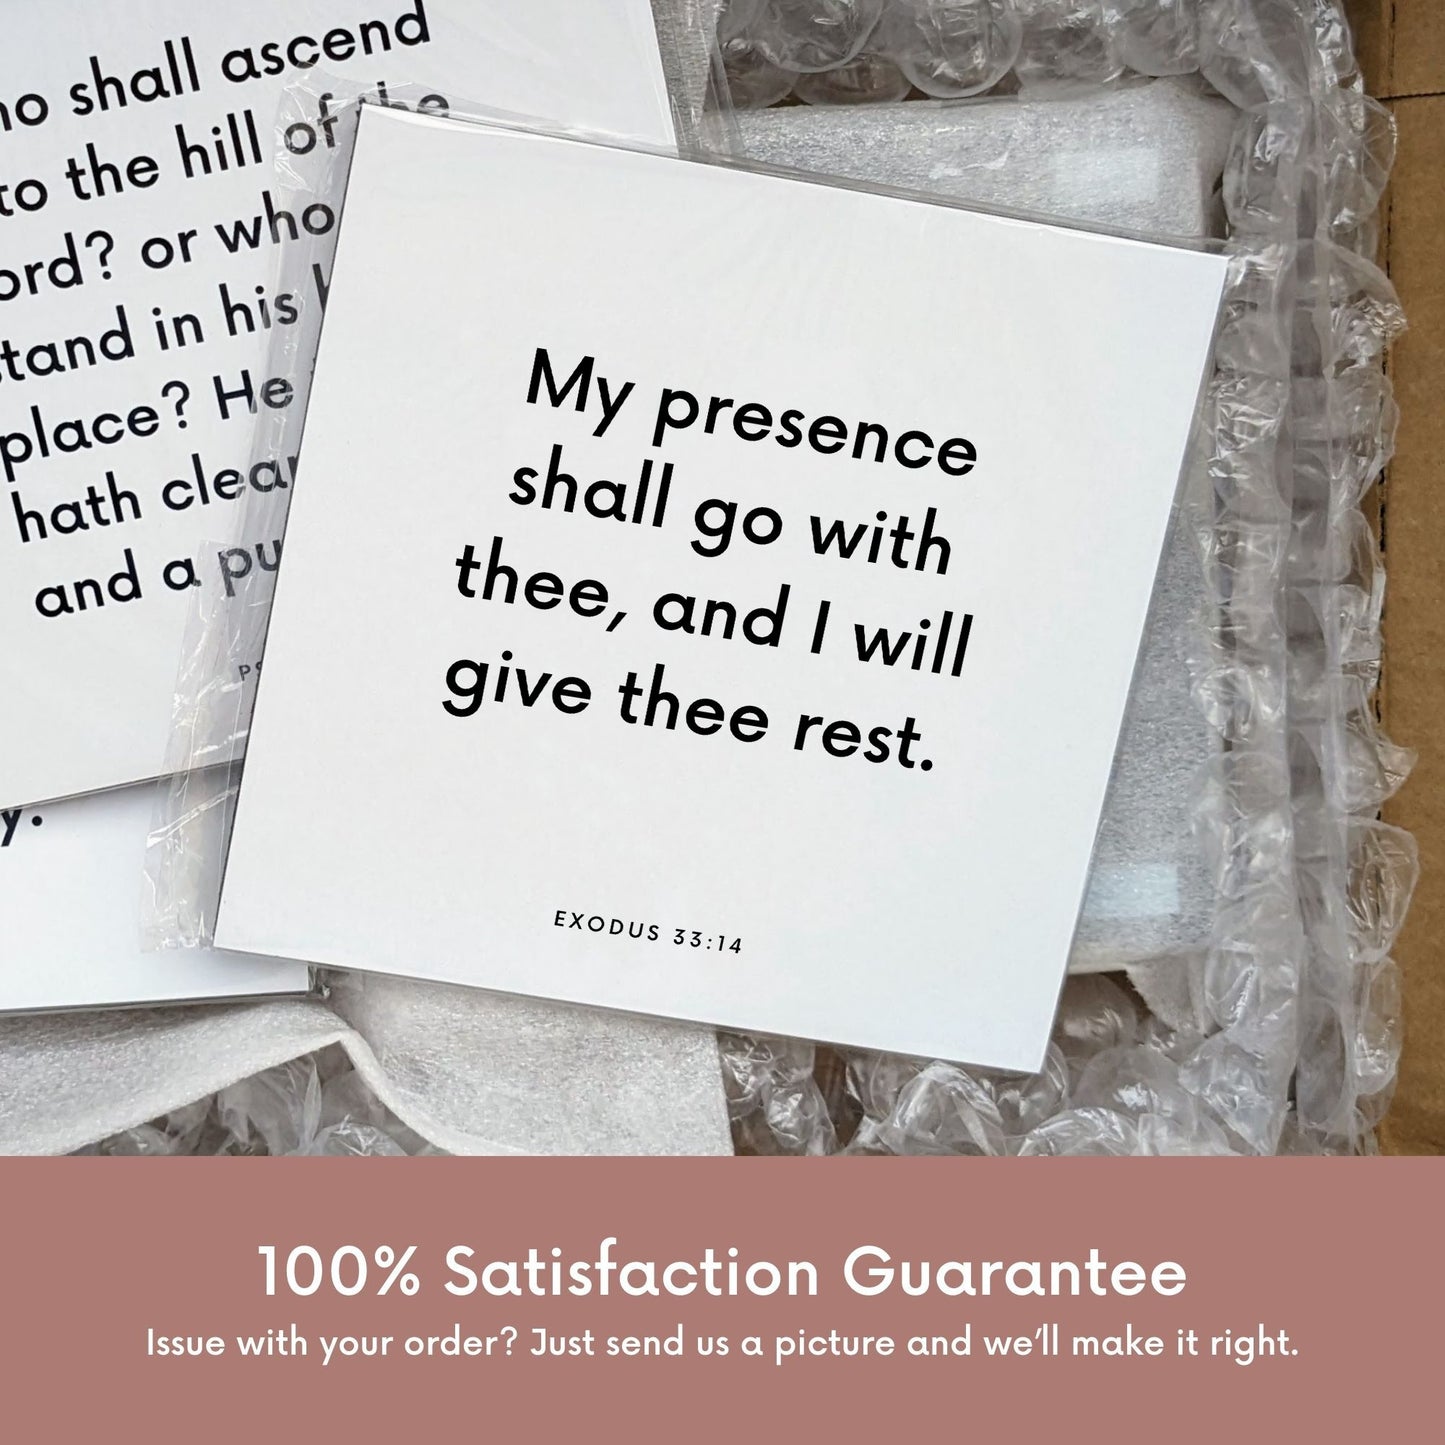 Shipping materials for scripture tile of Exodus 33:14 - "My presence shall go with thee, and I will give thee rest"